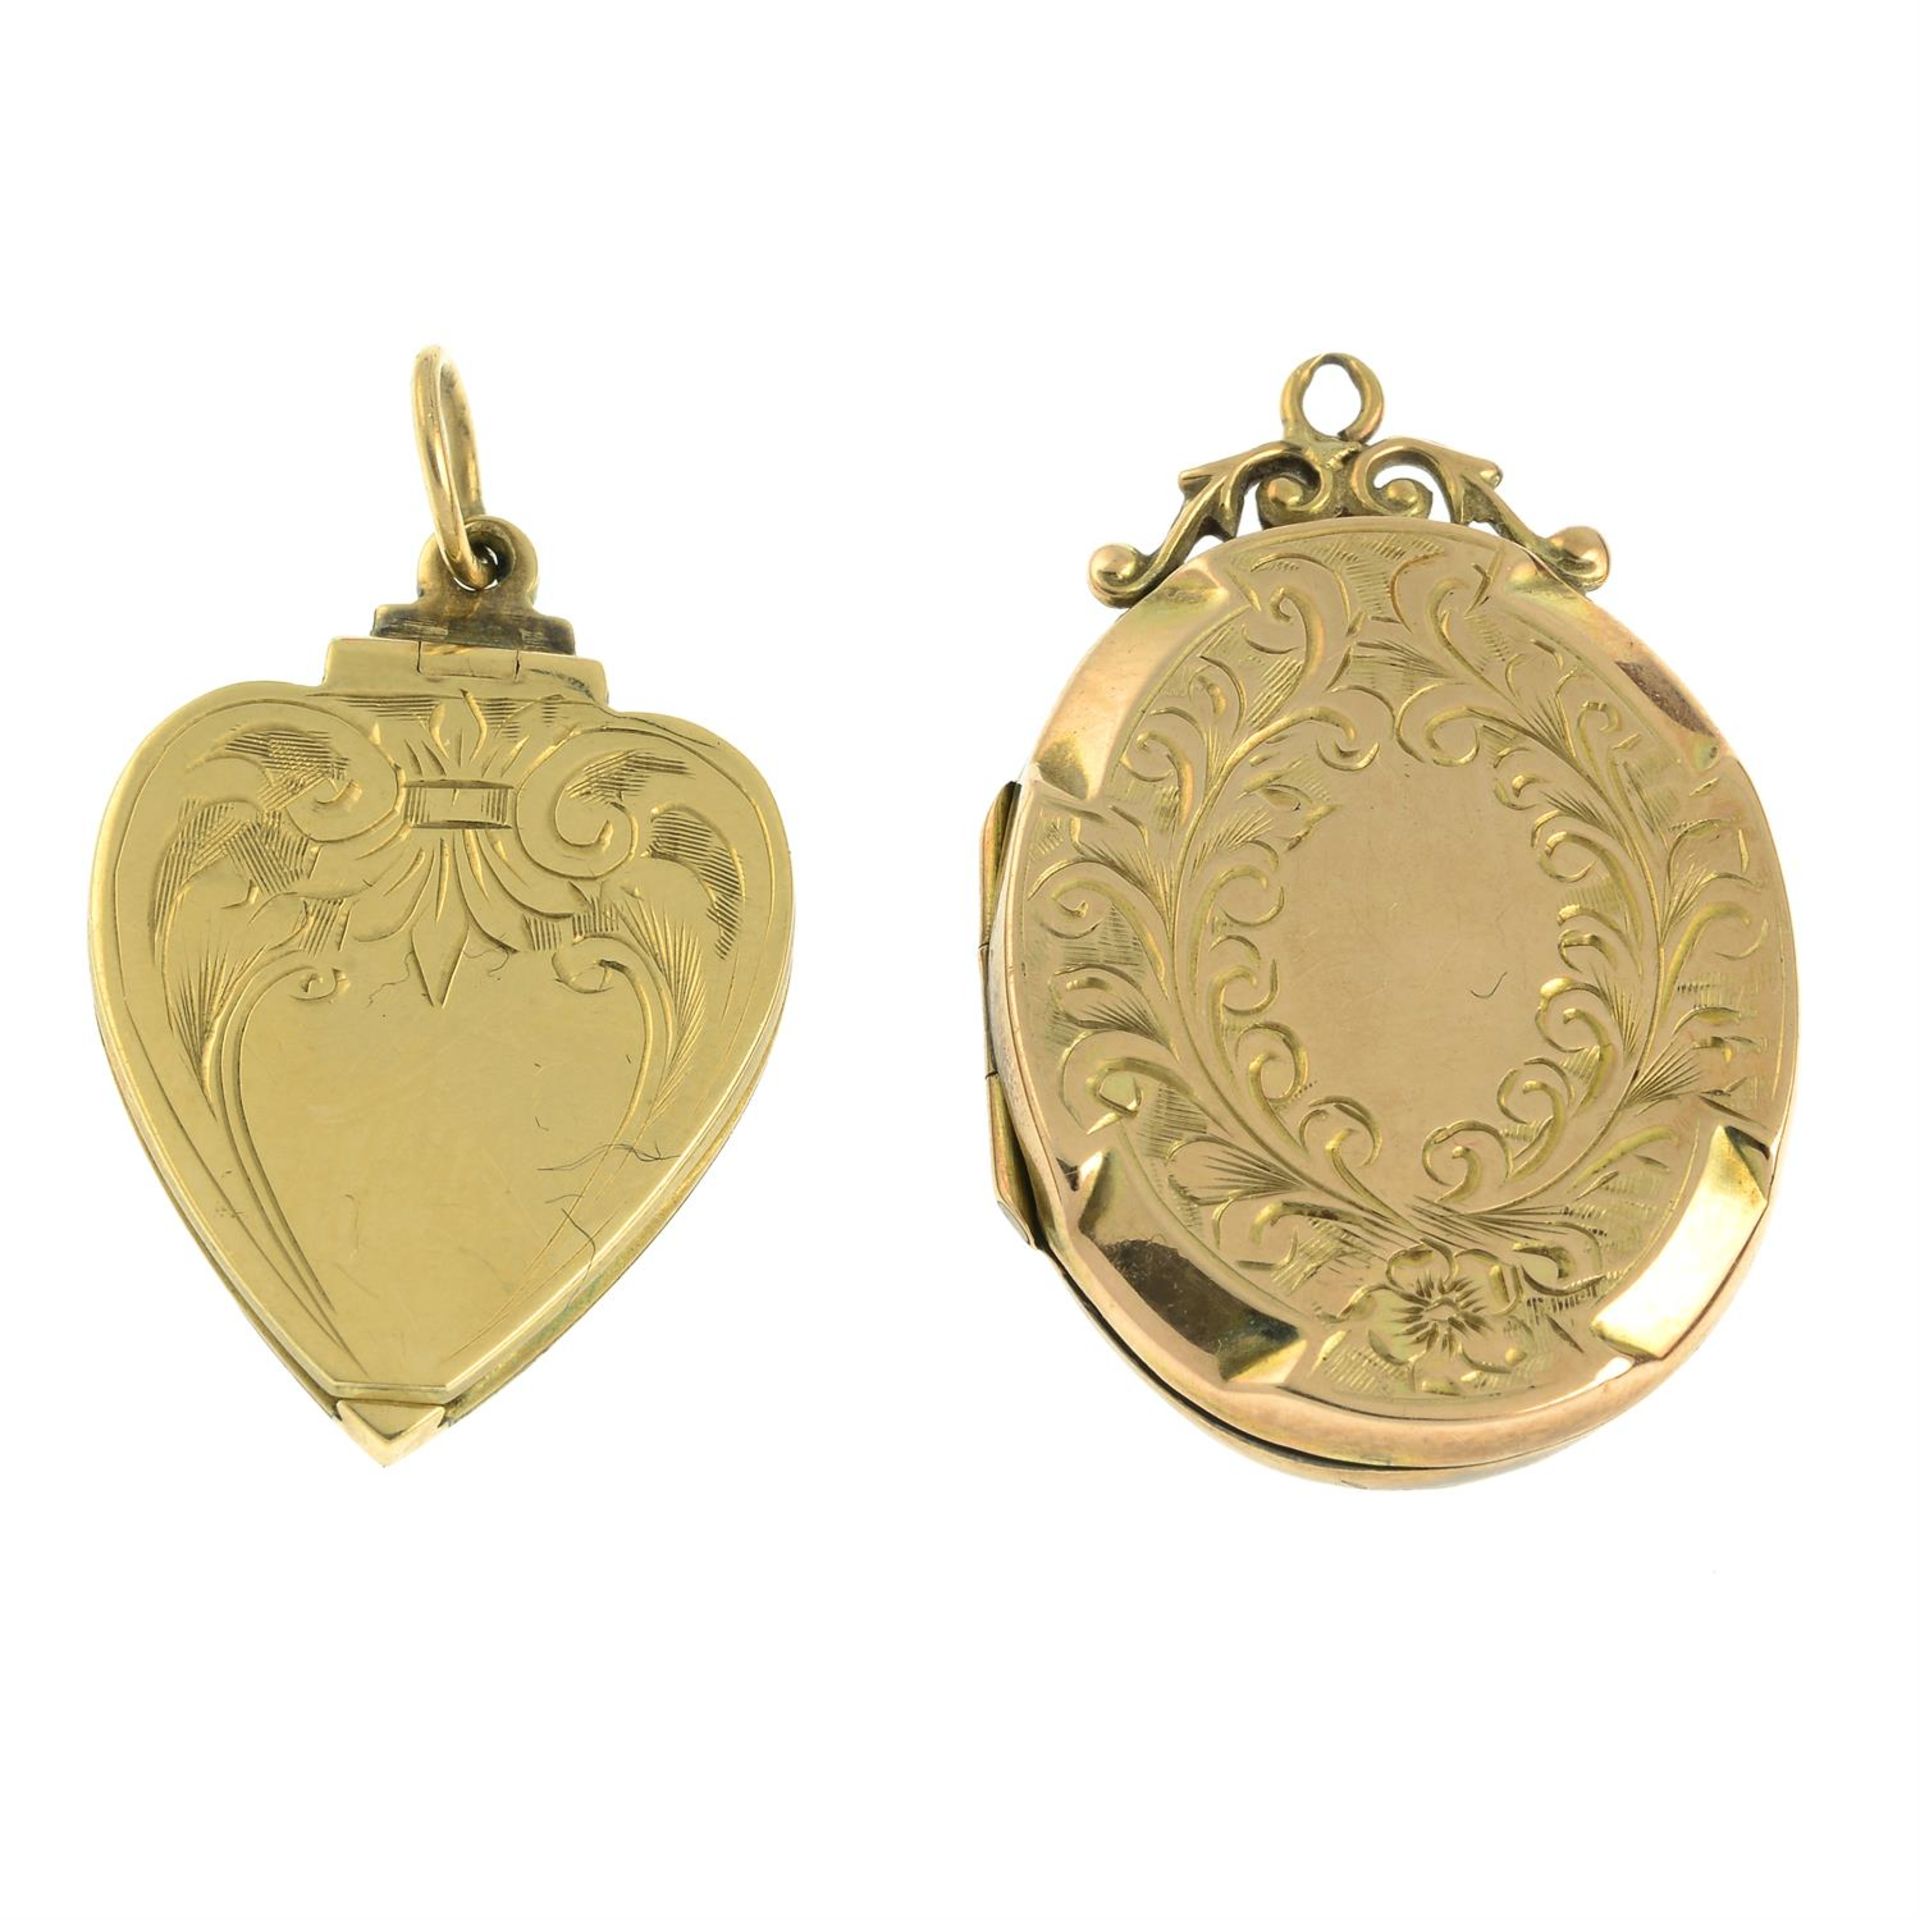 Two early 20rth century 9ct gold back and front locket pendants.